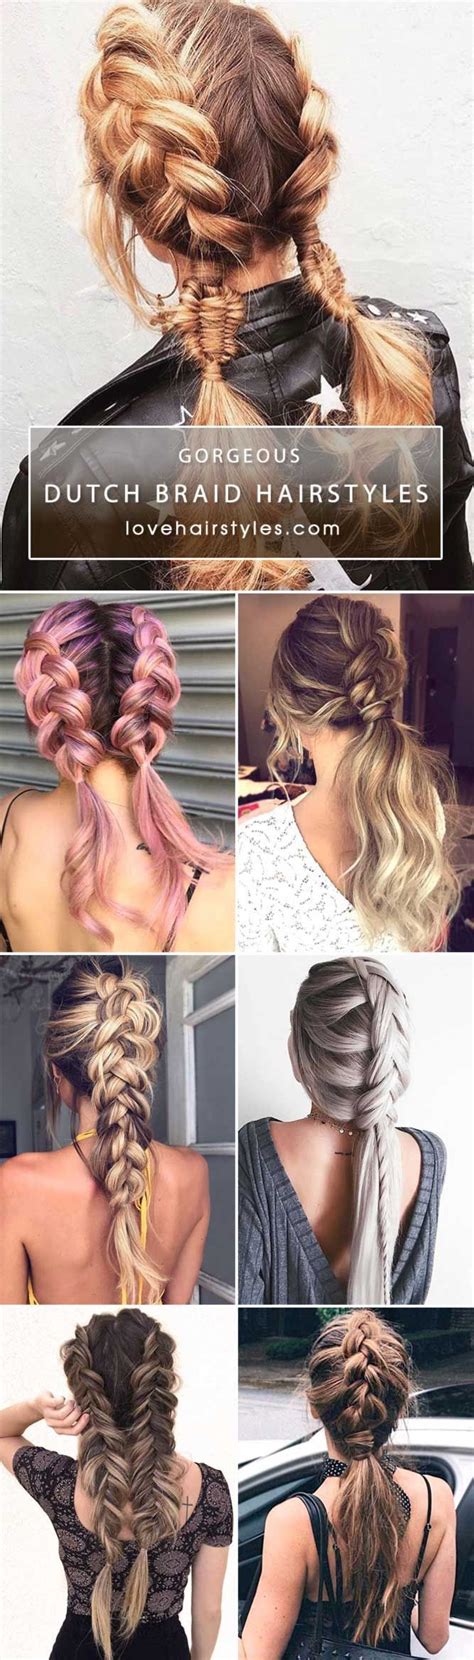 Dutch Braids Are Among The Most Sophisticated Long Hairstyles Now Let